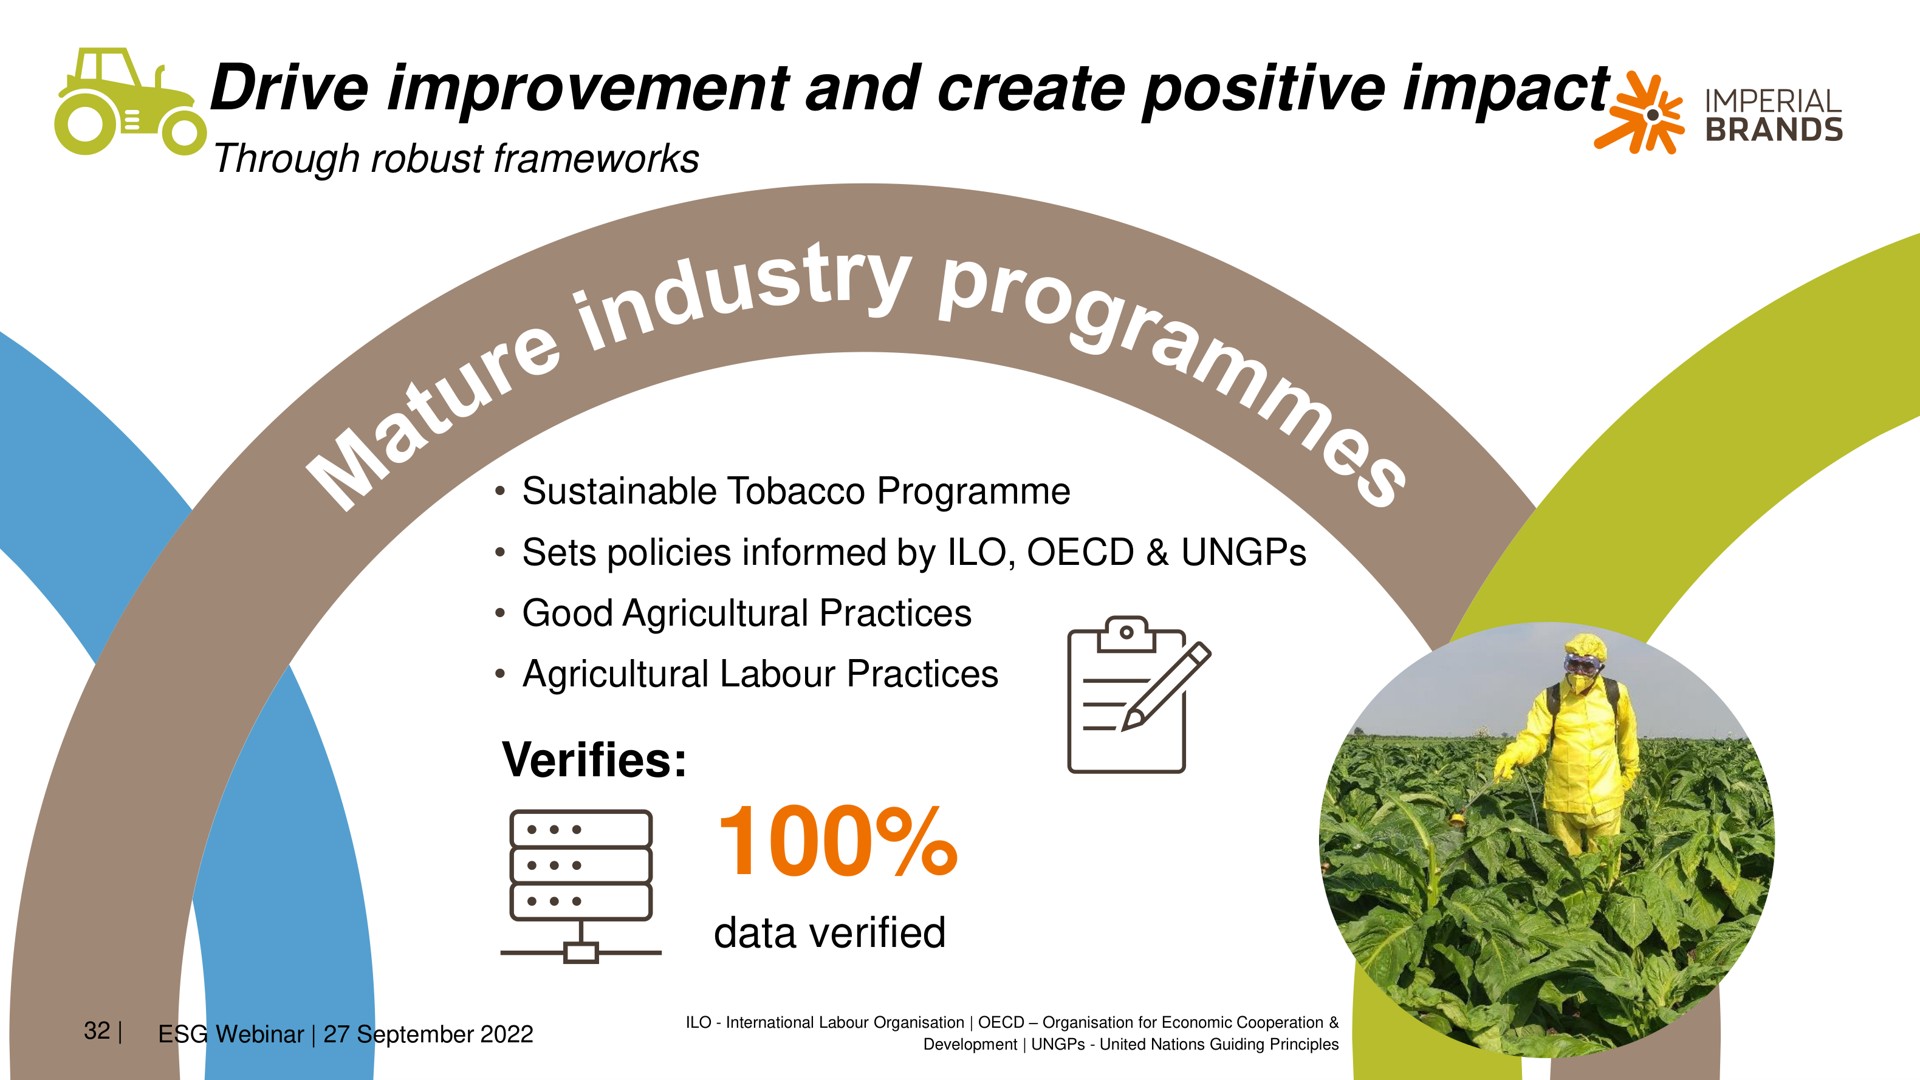 drive improvement and create positive impact owe worn we ree | Imperial Brands